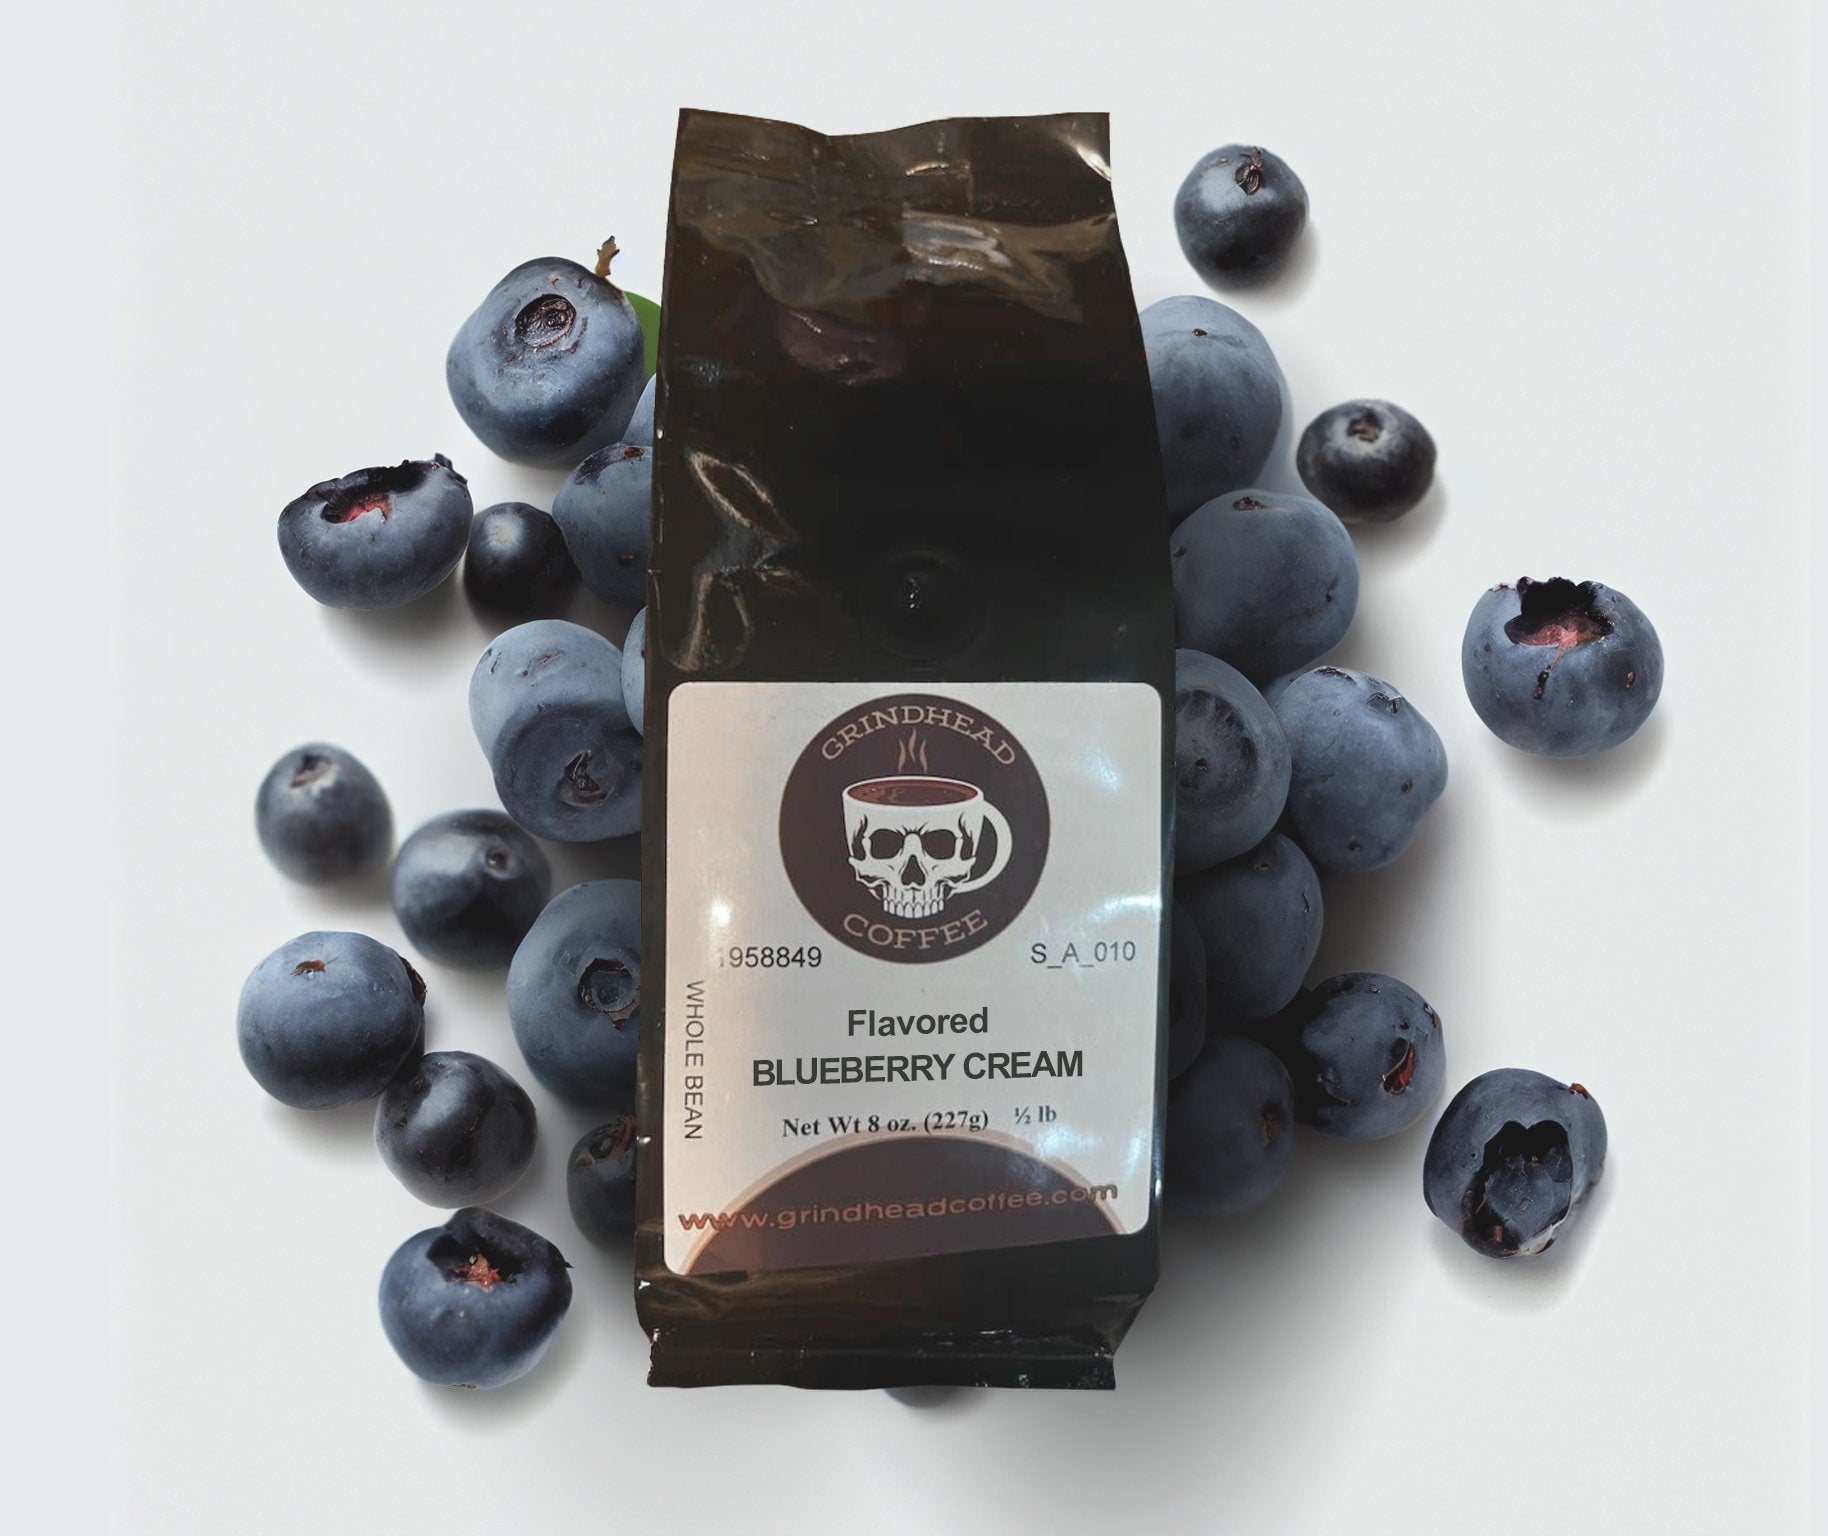 Blueberry Cream Coffee - Luxury Coffee Lover Gift - Blueberry Flavored Coffee - Springtime Coffee